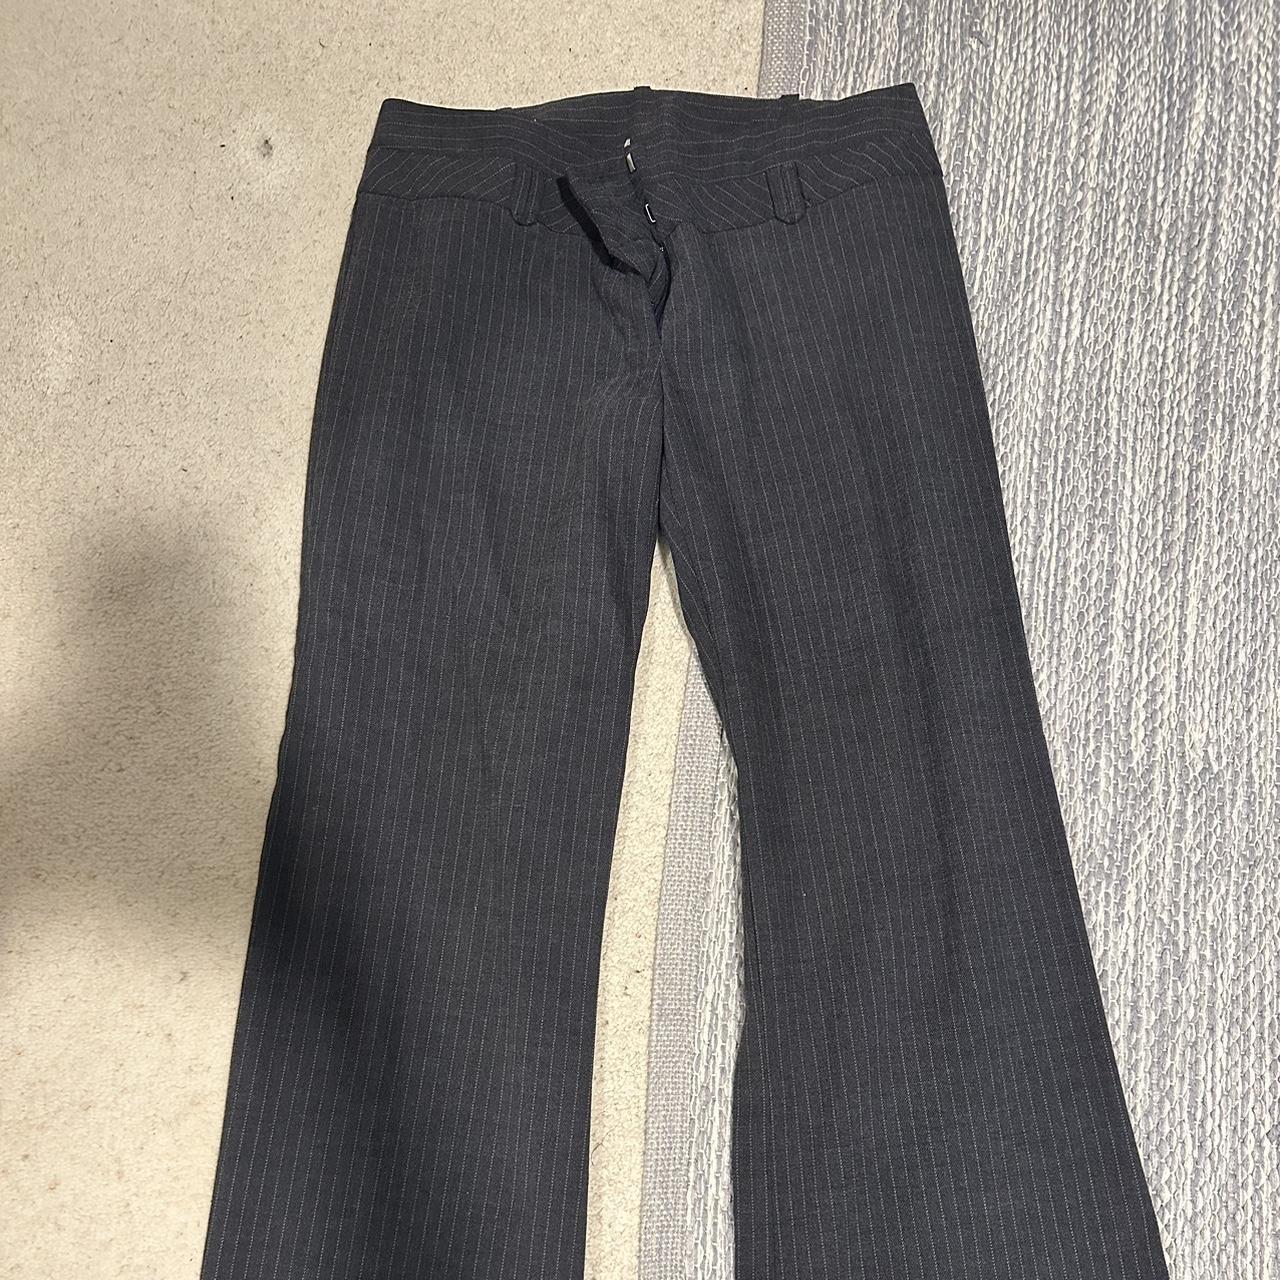 vintage suit pants bought from depop in perfect... - Depop